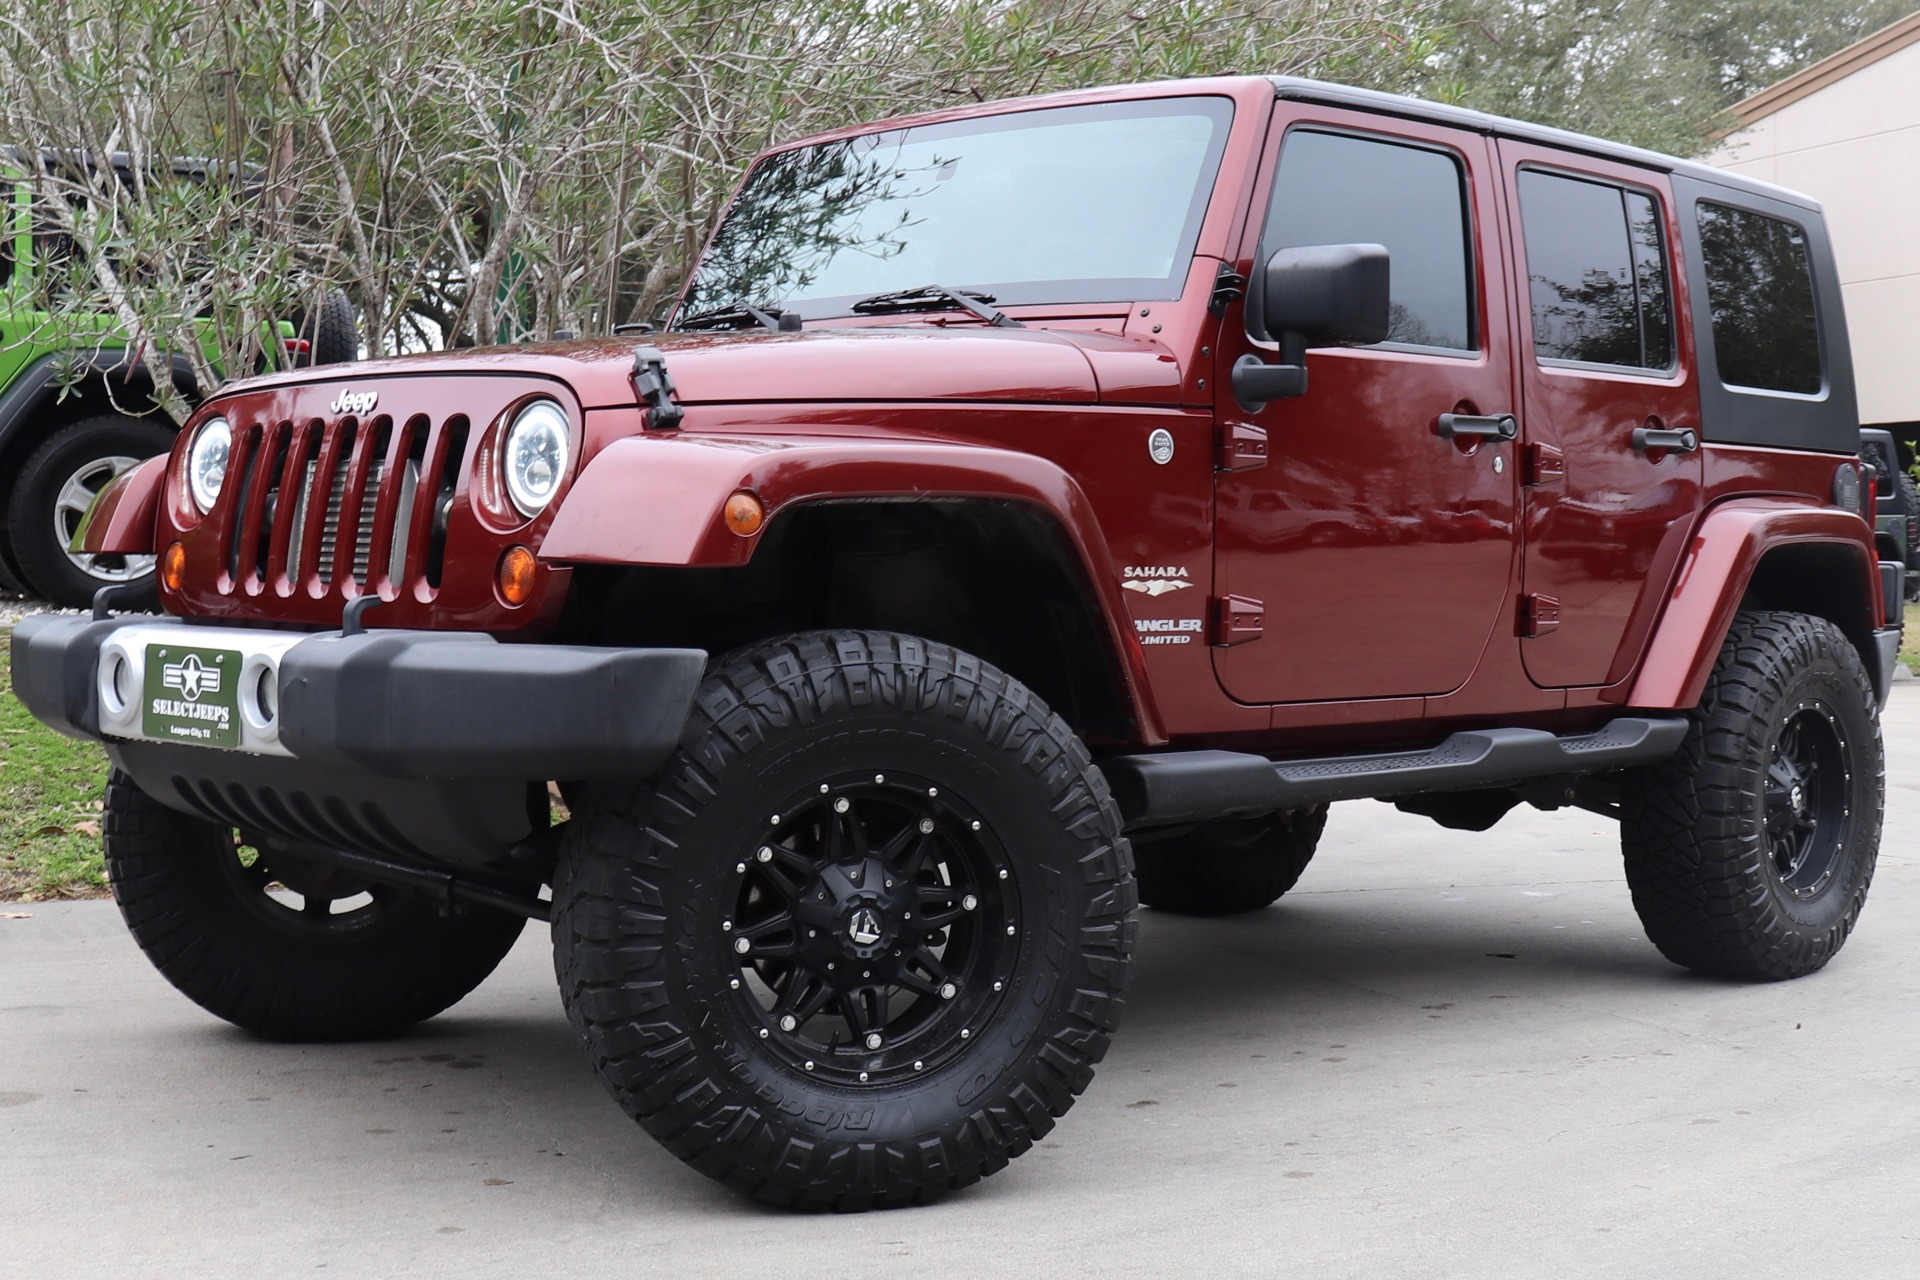 Used 2010 Jeep Wrangler Unlimited Sahara For Sale ($22,995) | Select ...